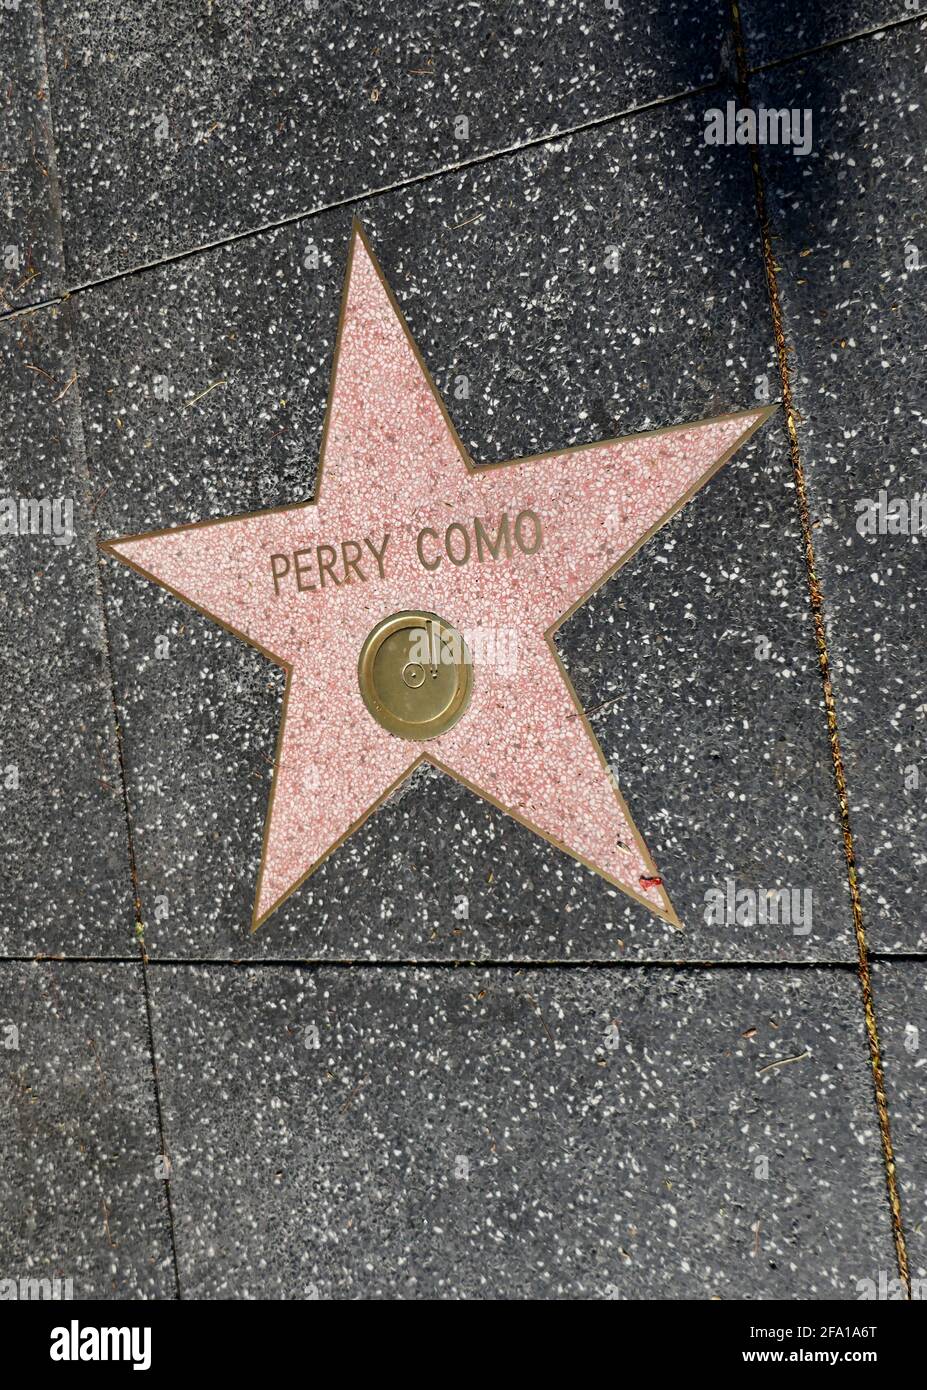 Hollywood, California, USA 17th April 2021 A general view of atmosphere of singer Perry Como's Star on the Hollywood Walk of Fame on April 17, 2021 in Hollywood, California, USA. Photo by Barry King/Alamy Stock Photo Stock Photo